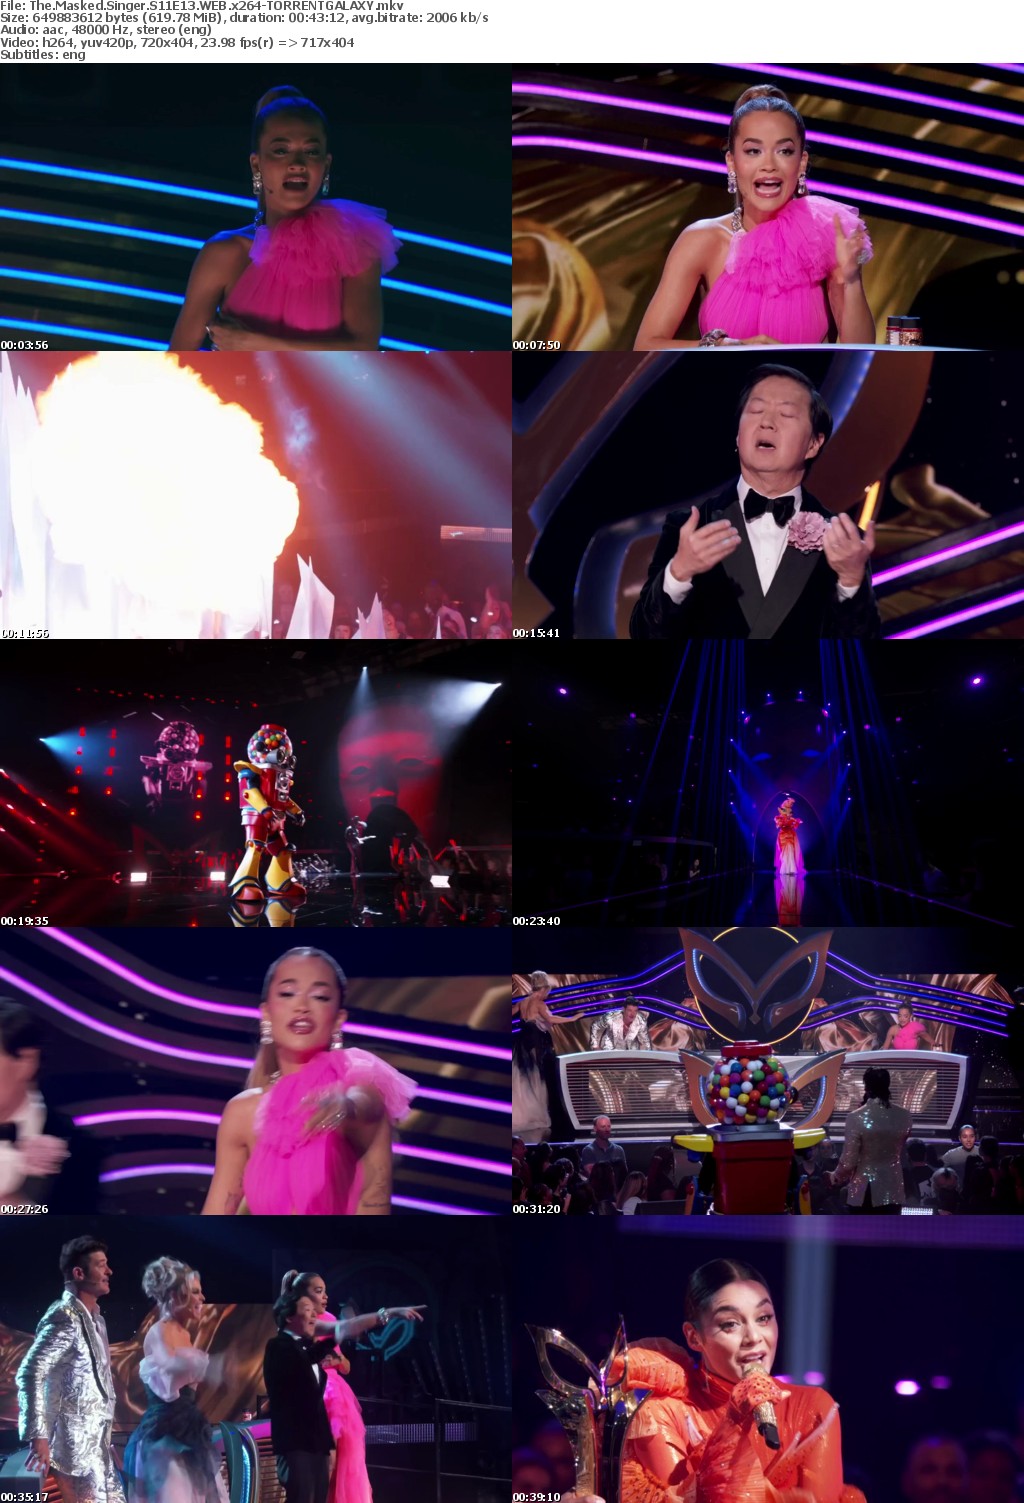 The Masked Singer S11E13 WEB x264-GALAXY